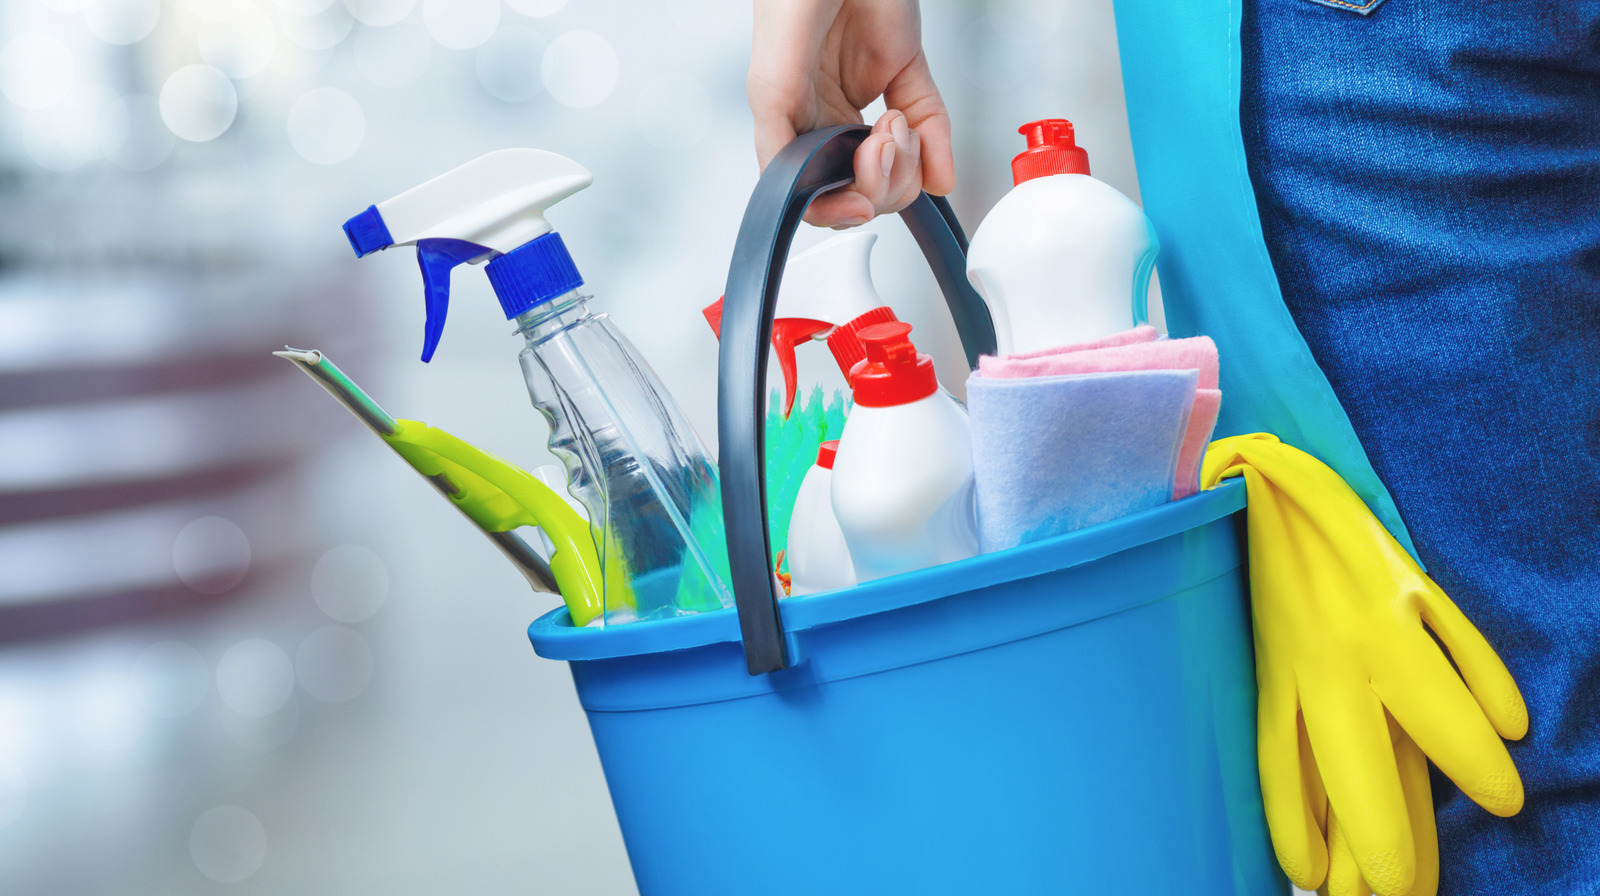 https://www.housedigest.com/img/gallery/you-might-be-storing-your-cleaning-products-all-wrong/l-intro-1636138187.jpg